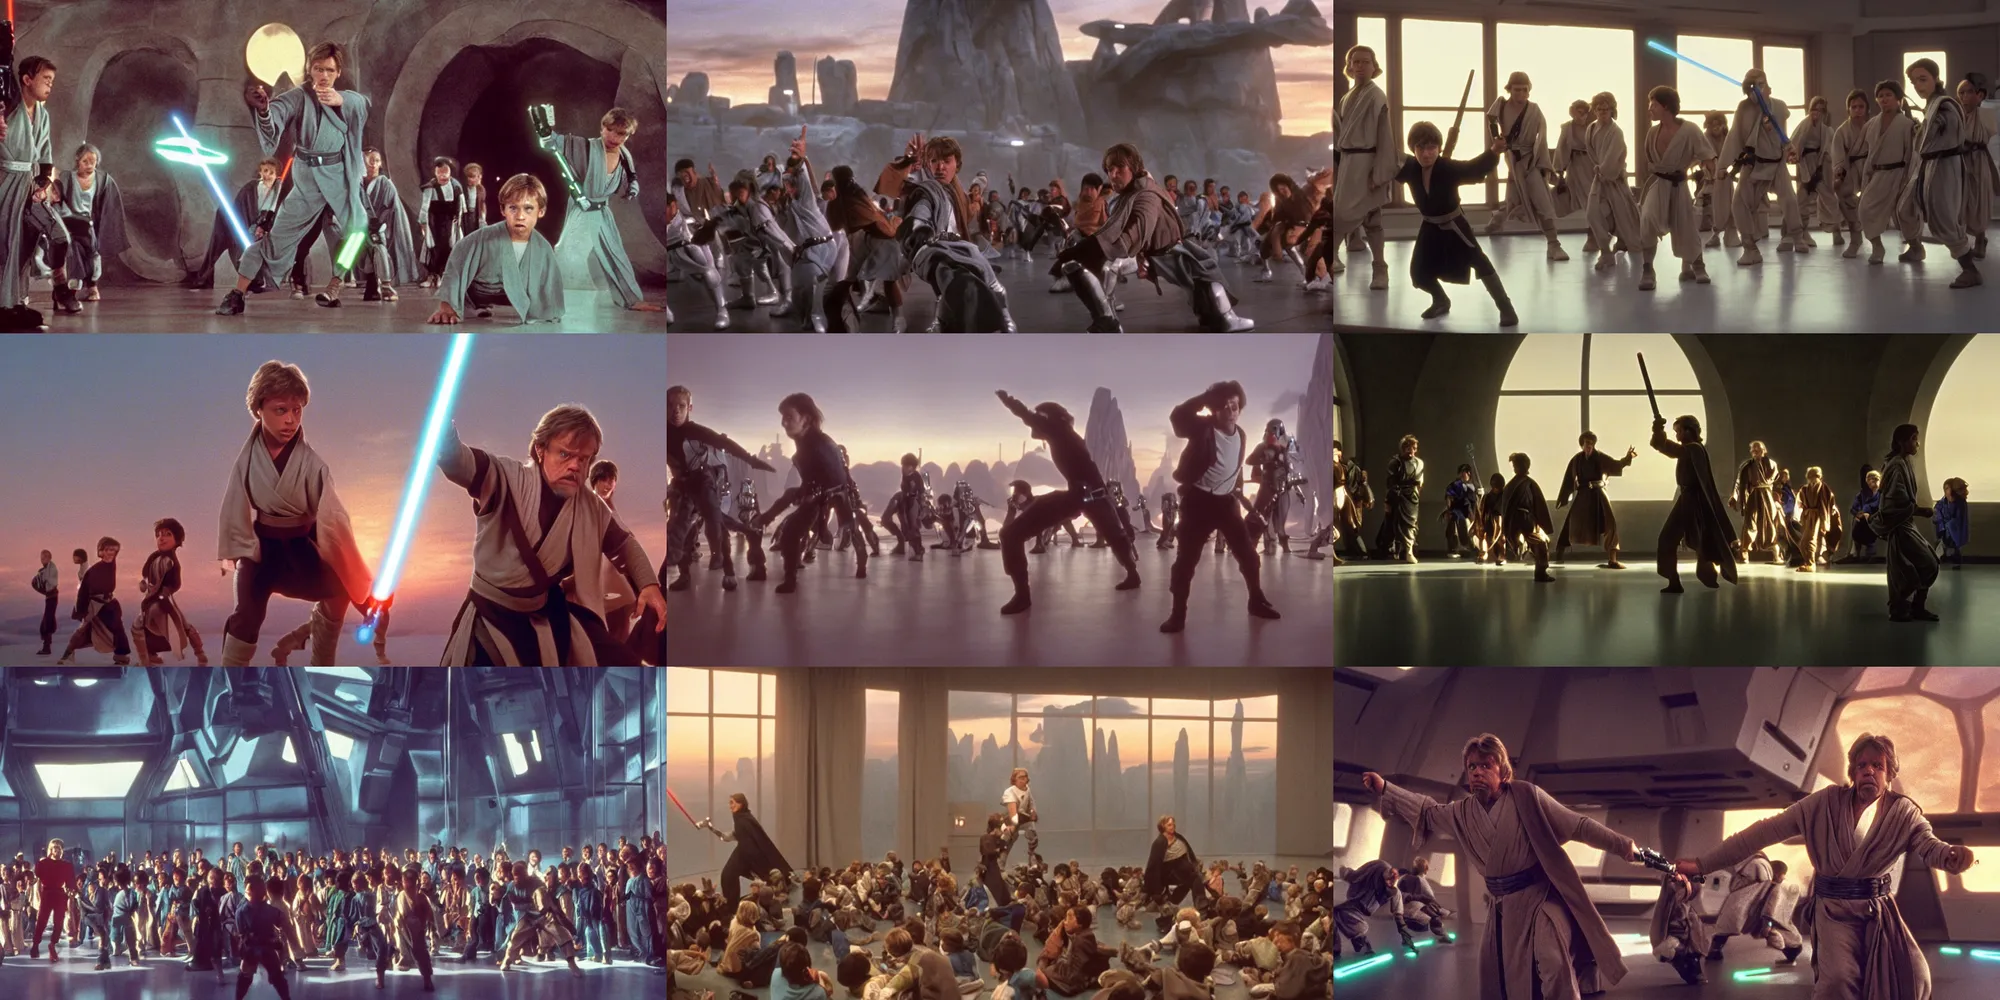 Prompt: A full color still of Mark Hamill as Jedi Master Luke Skywalker training a diverse room of young Jedi padawans, with large windows showing a sci-fi city outside, at dusk at golden hour, from The Phantom Menace, directed by Steven Spielberg, 1997